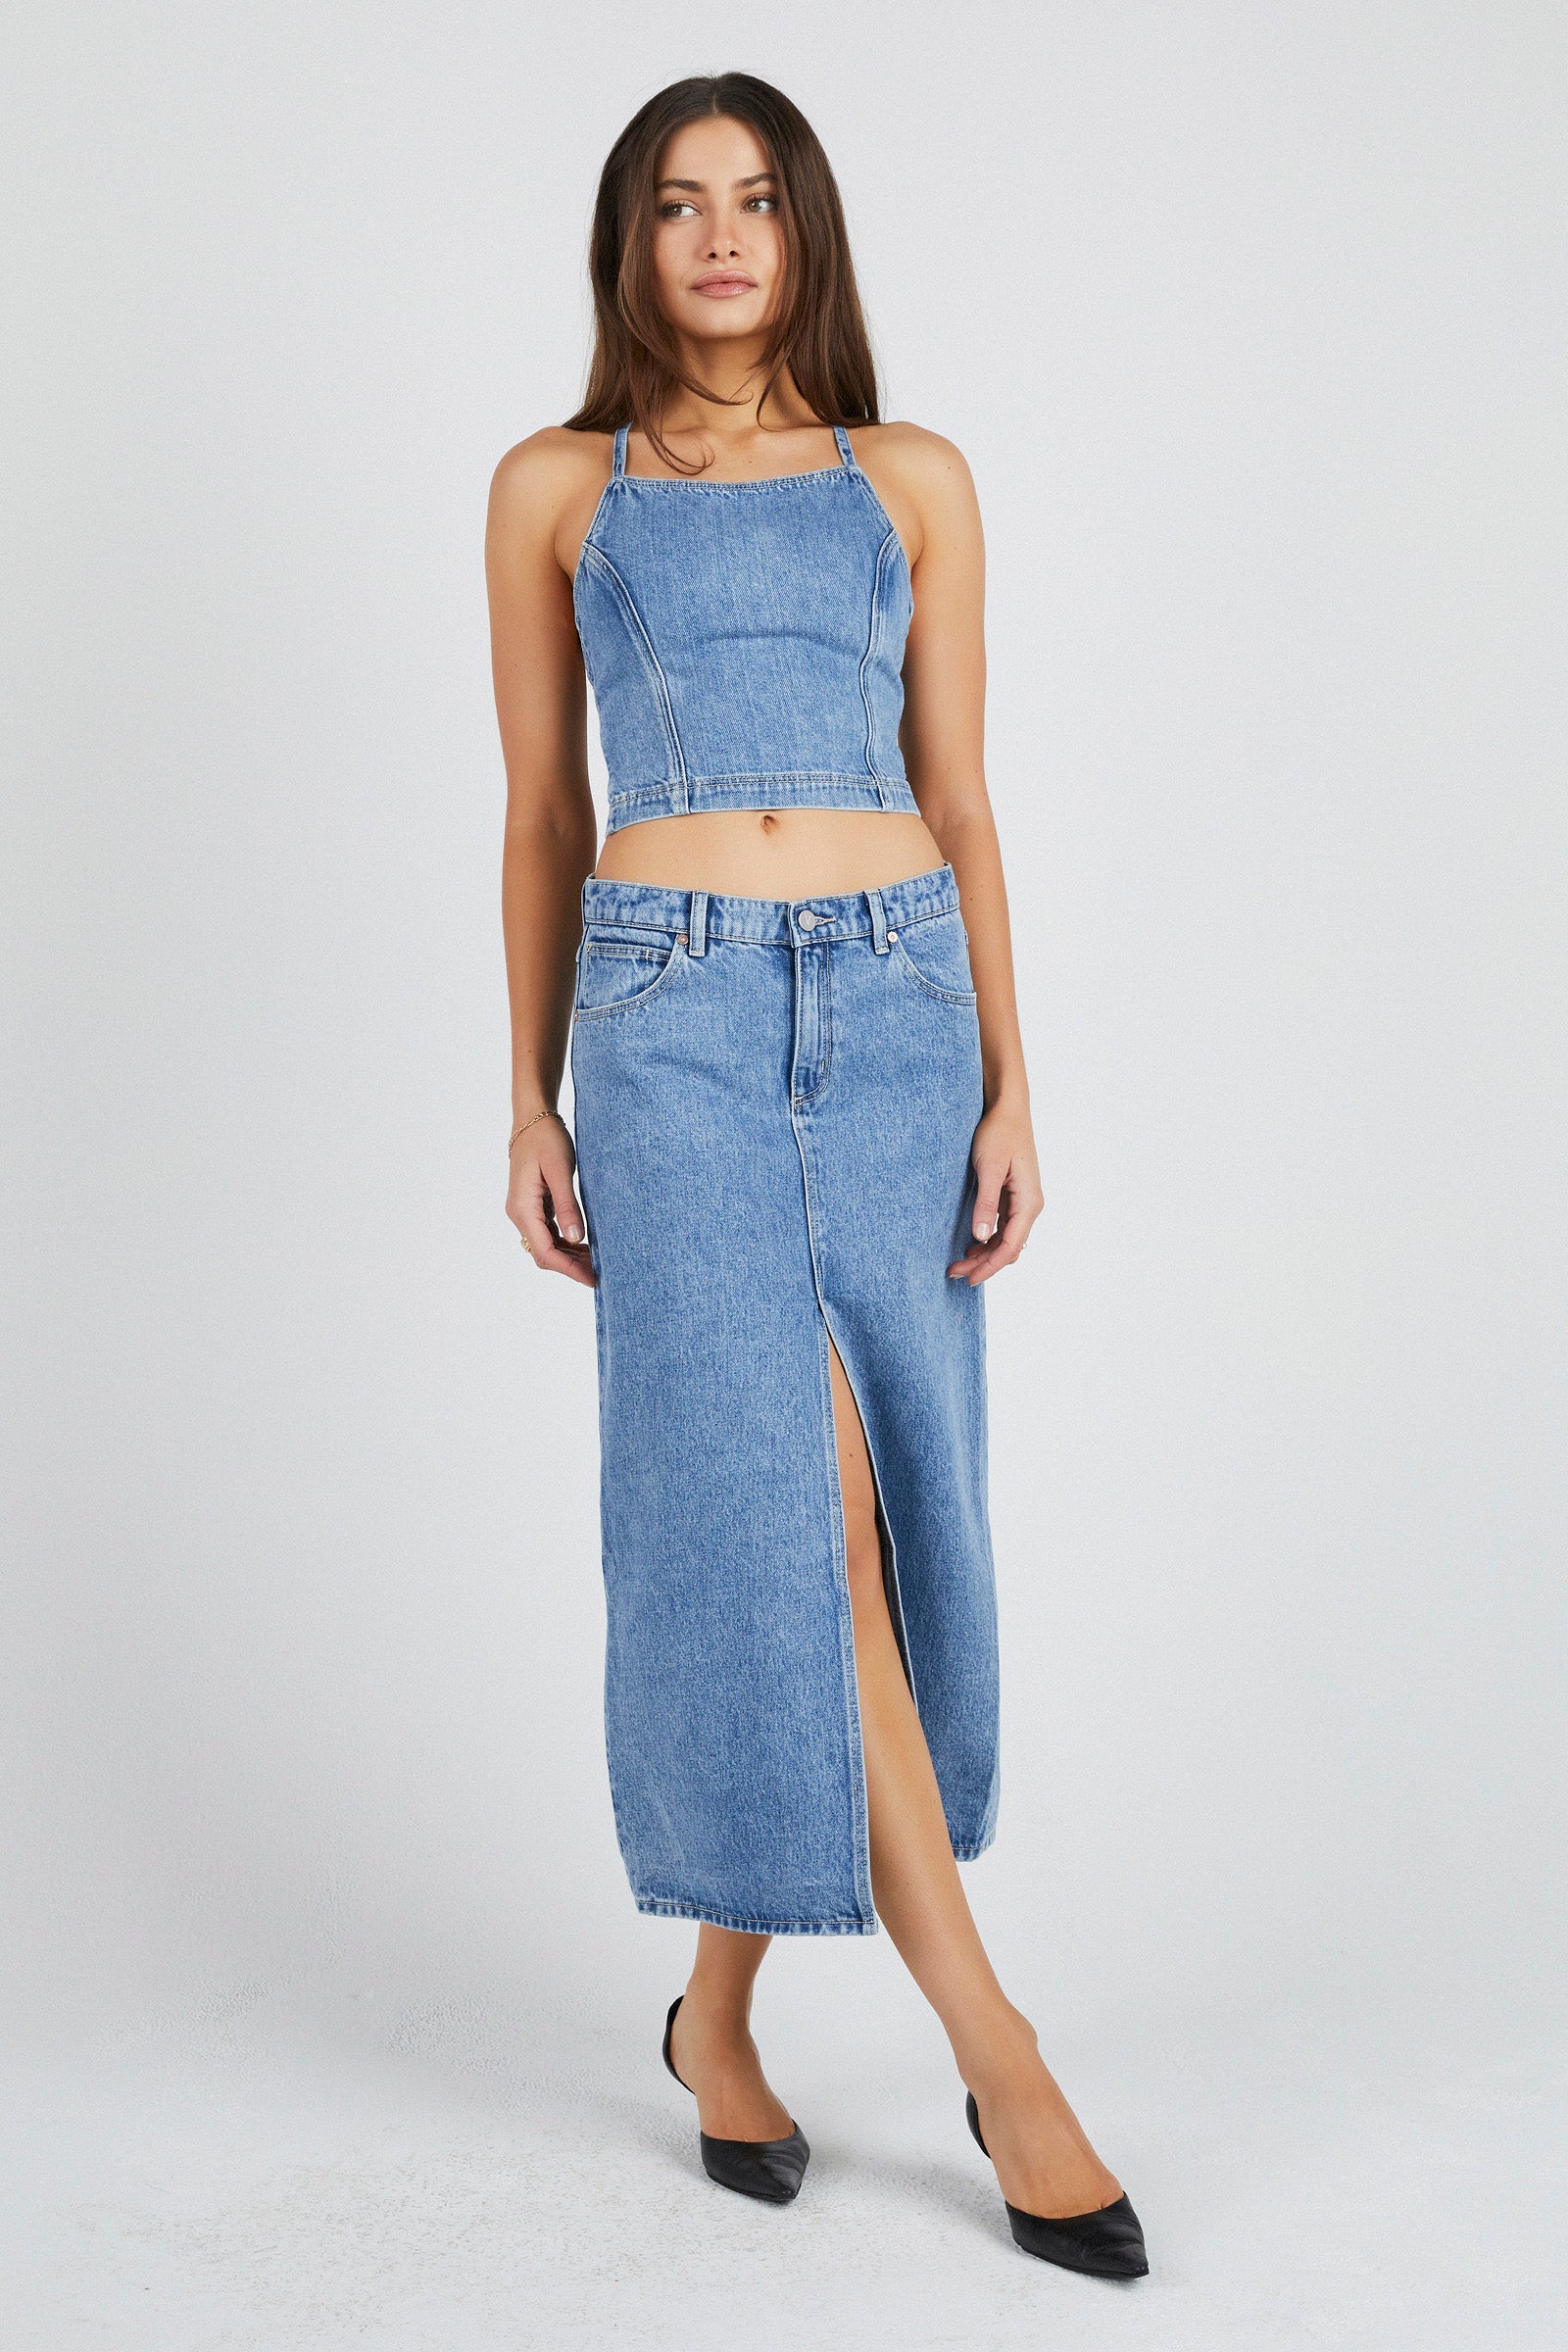 Buy Womens Maxi Skirts Online | Abrand Jeans